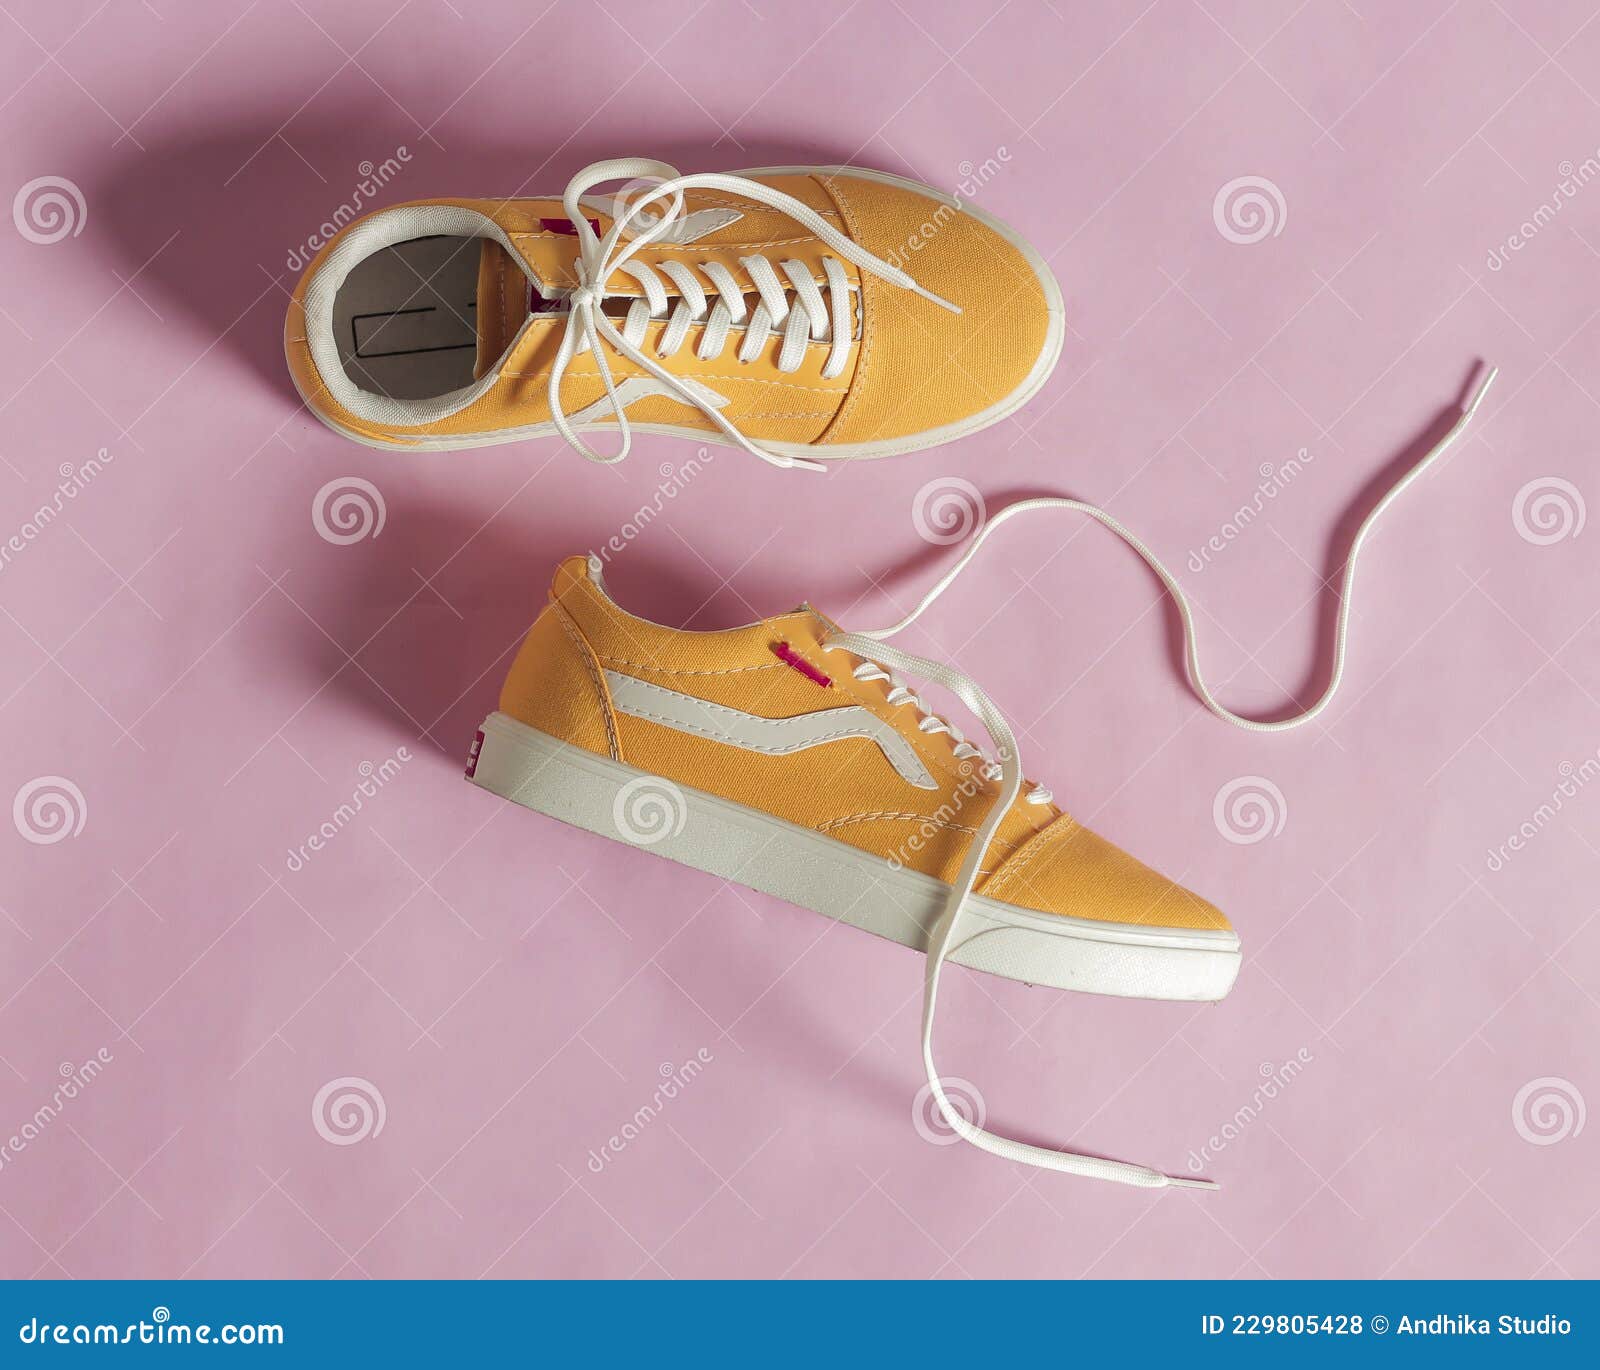 Yellow Converse Sneakers Isolated on Stock Photo - Image of comfortable, classic: 229805428